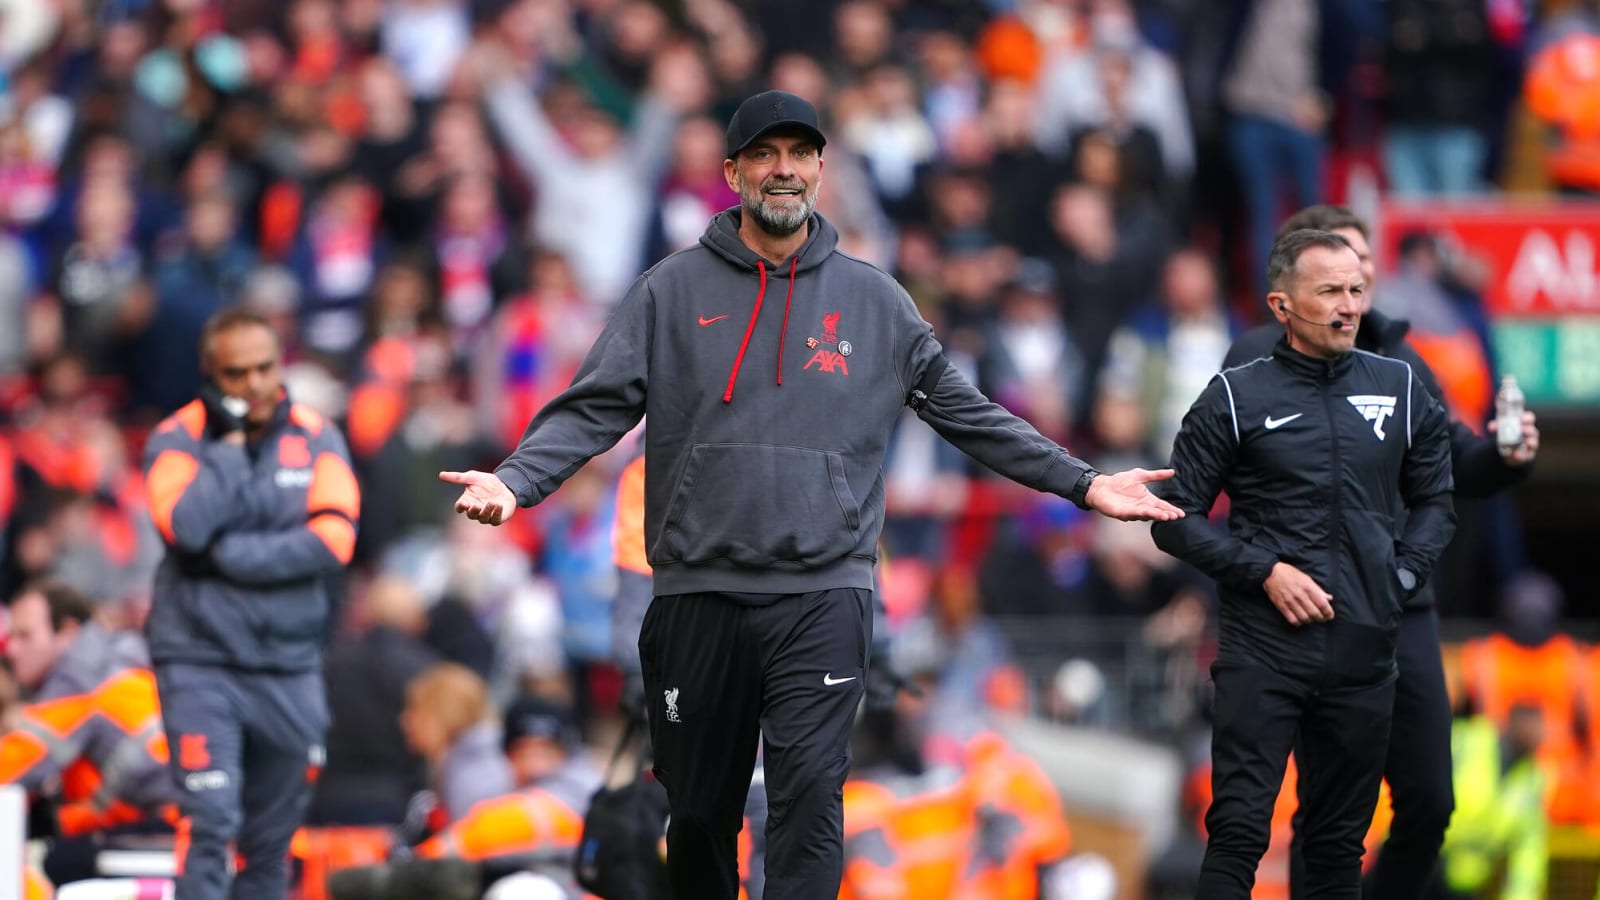 Ex-Liverpool defender noticed a discernible change in Jurgen Klopp after Reds’ defeat to Palace